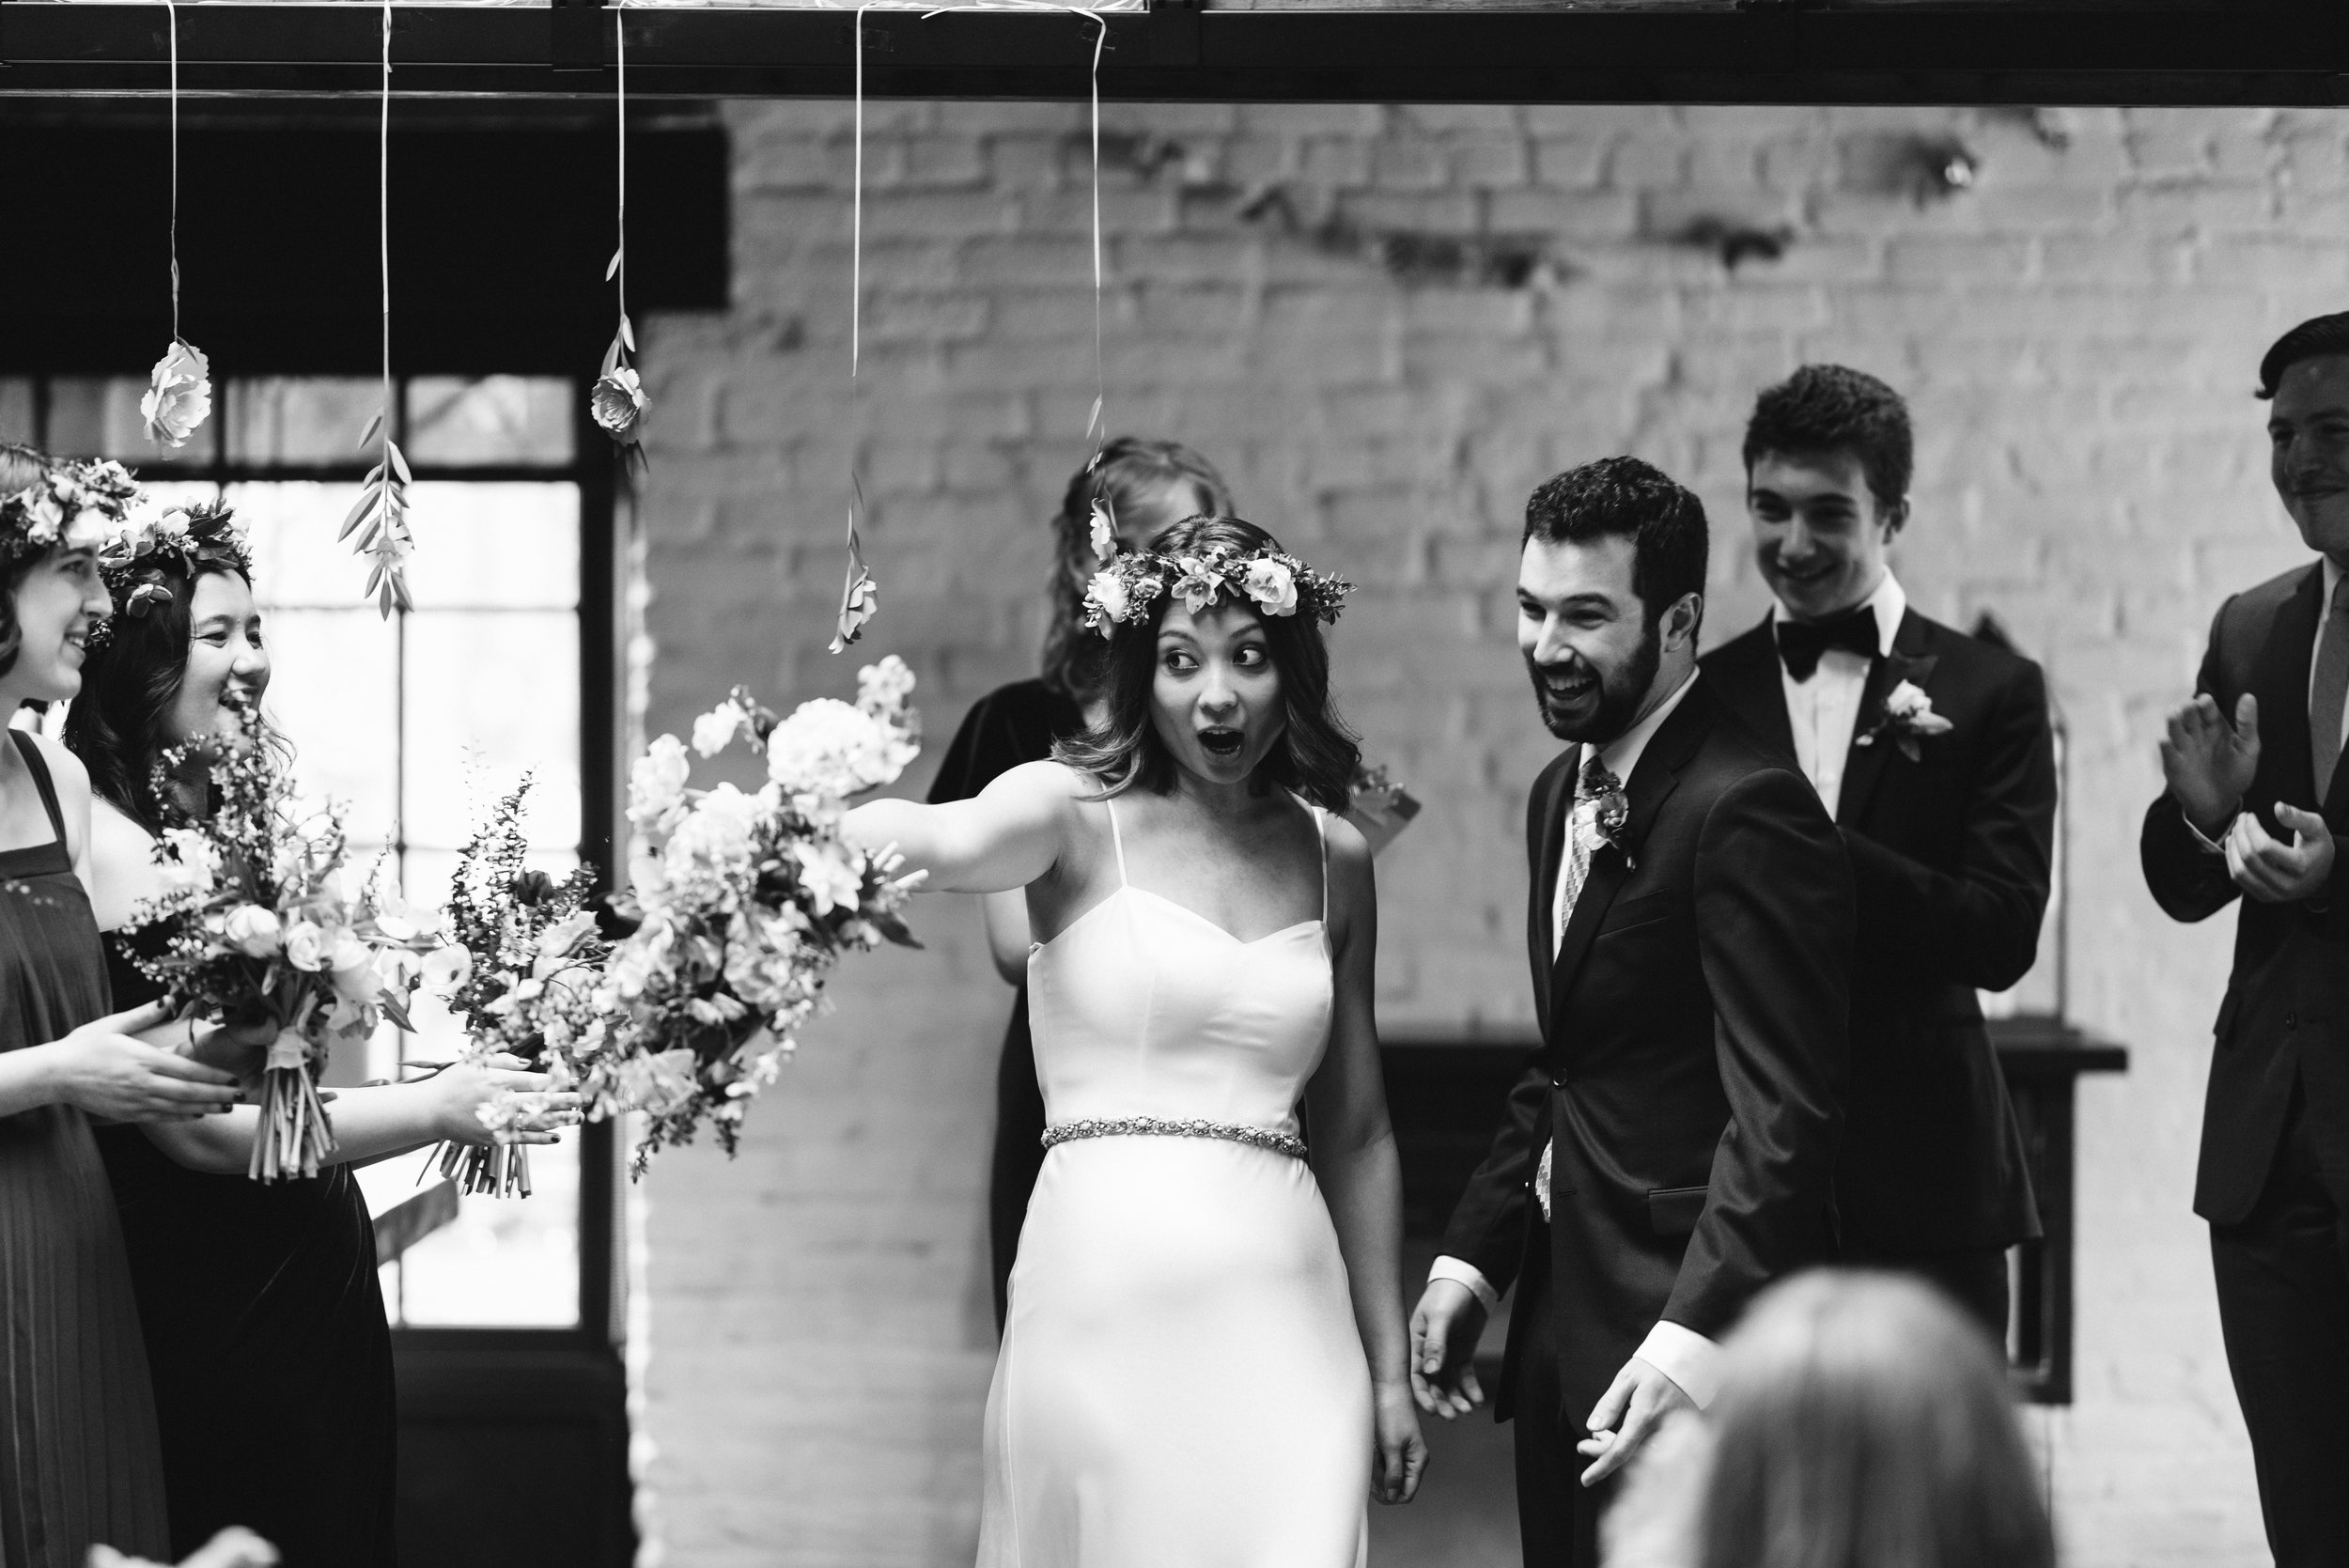  Washington DC, Baltimore Wedding Photographer, Alexandria, Old Town, Jewel Tone, Romantic, Modern, Virtue Feed &amp; Grain, Just Married, Fun Photo of Bride Pointing to Guests, Black and White Photo 